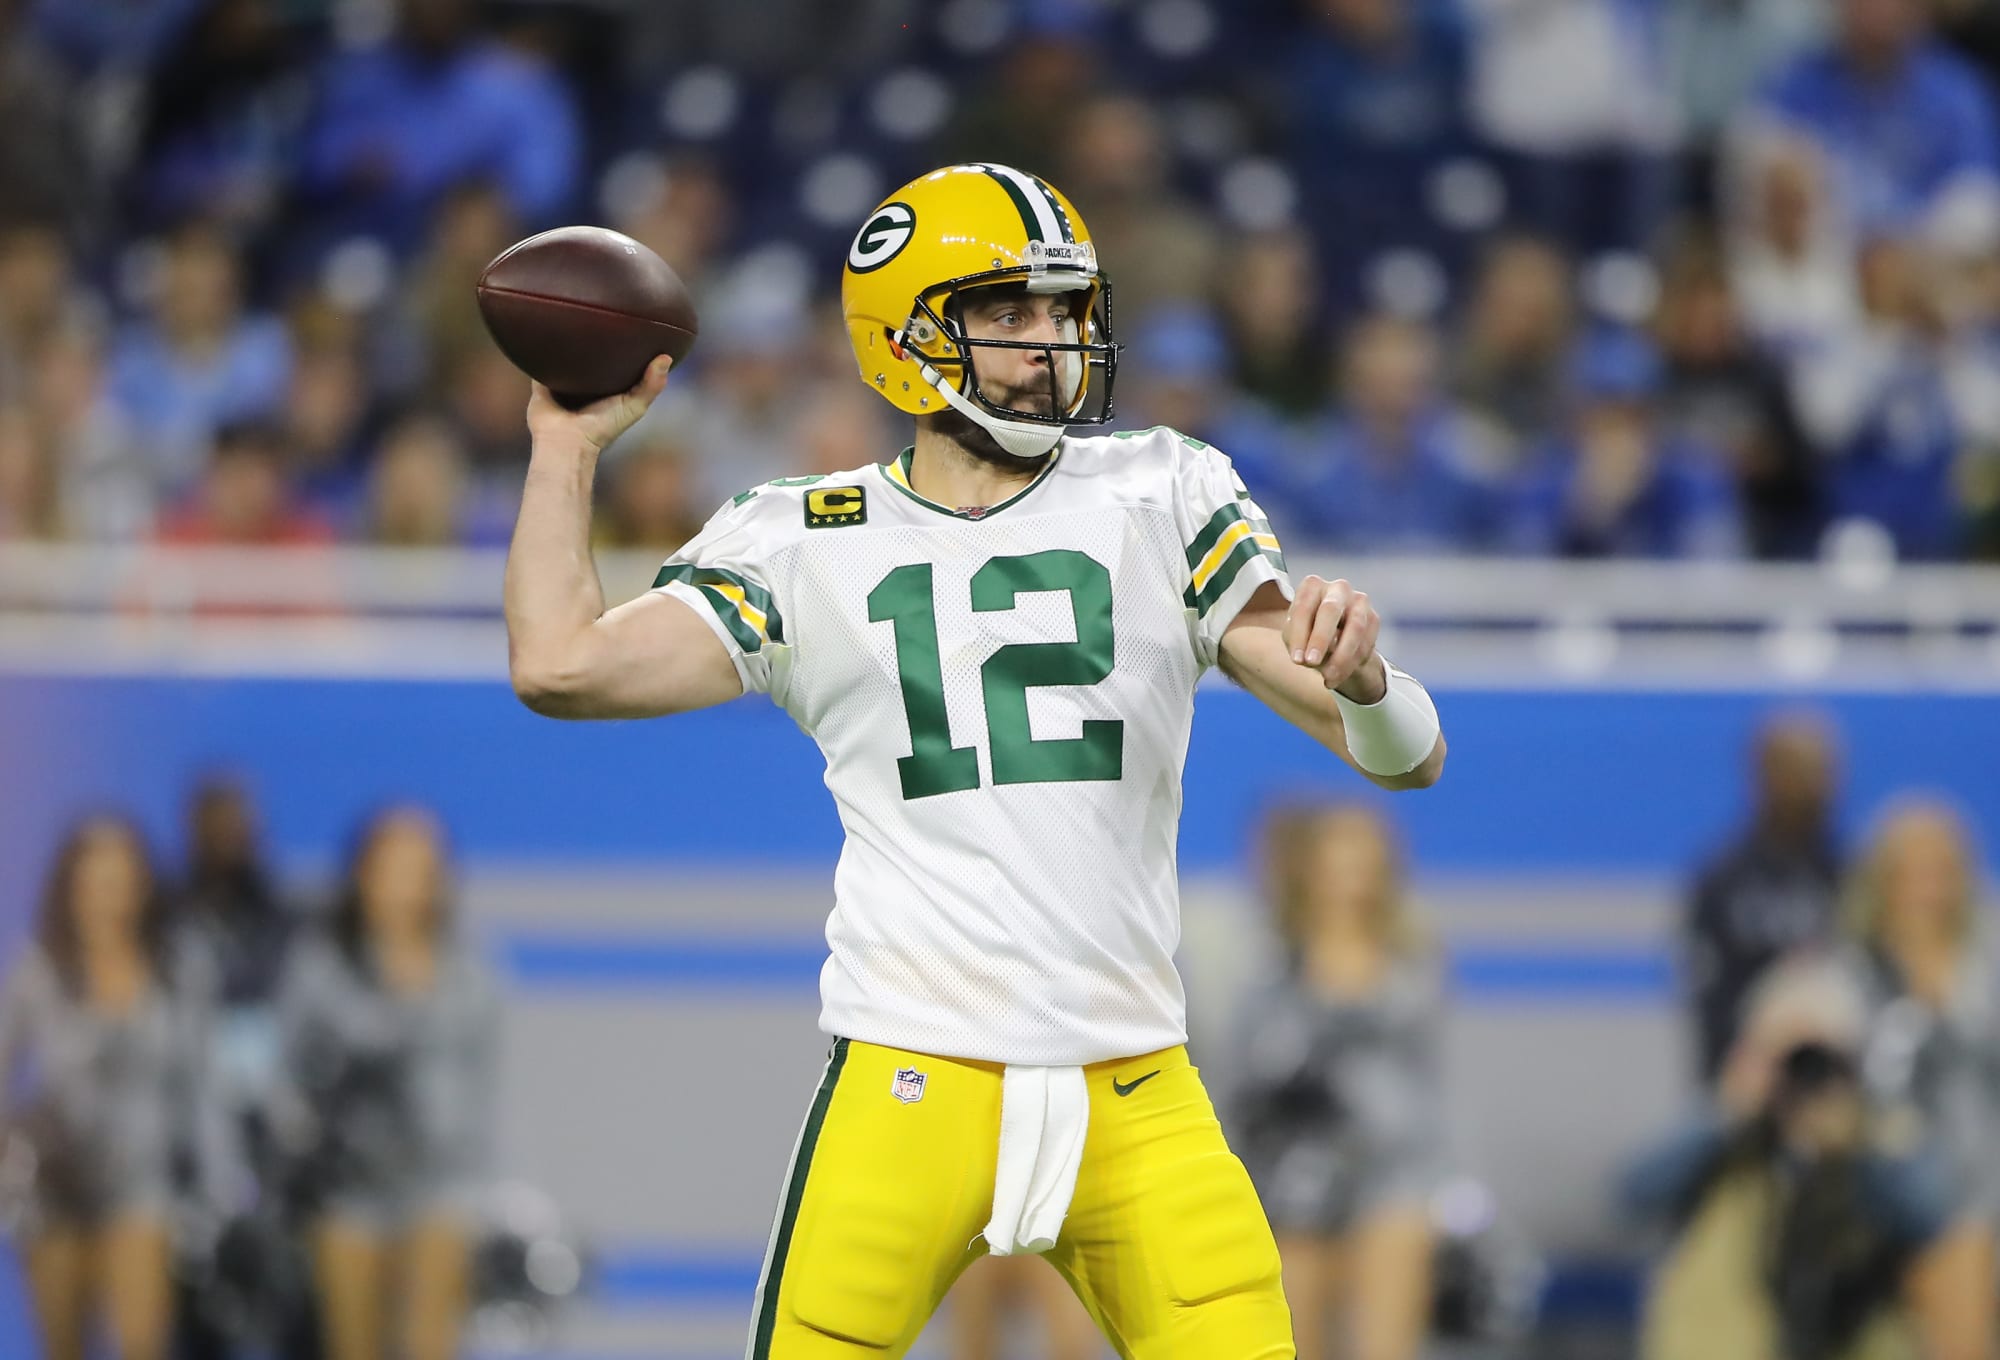 Green Bay Packers Rodgers' & Love's Contracts Do Not Align Well